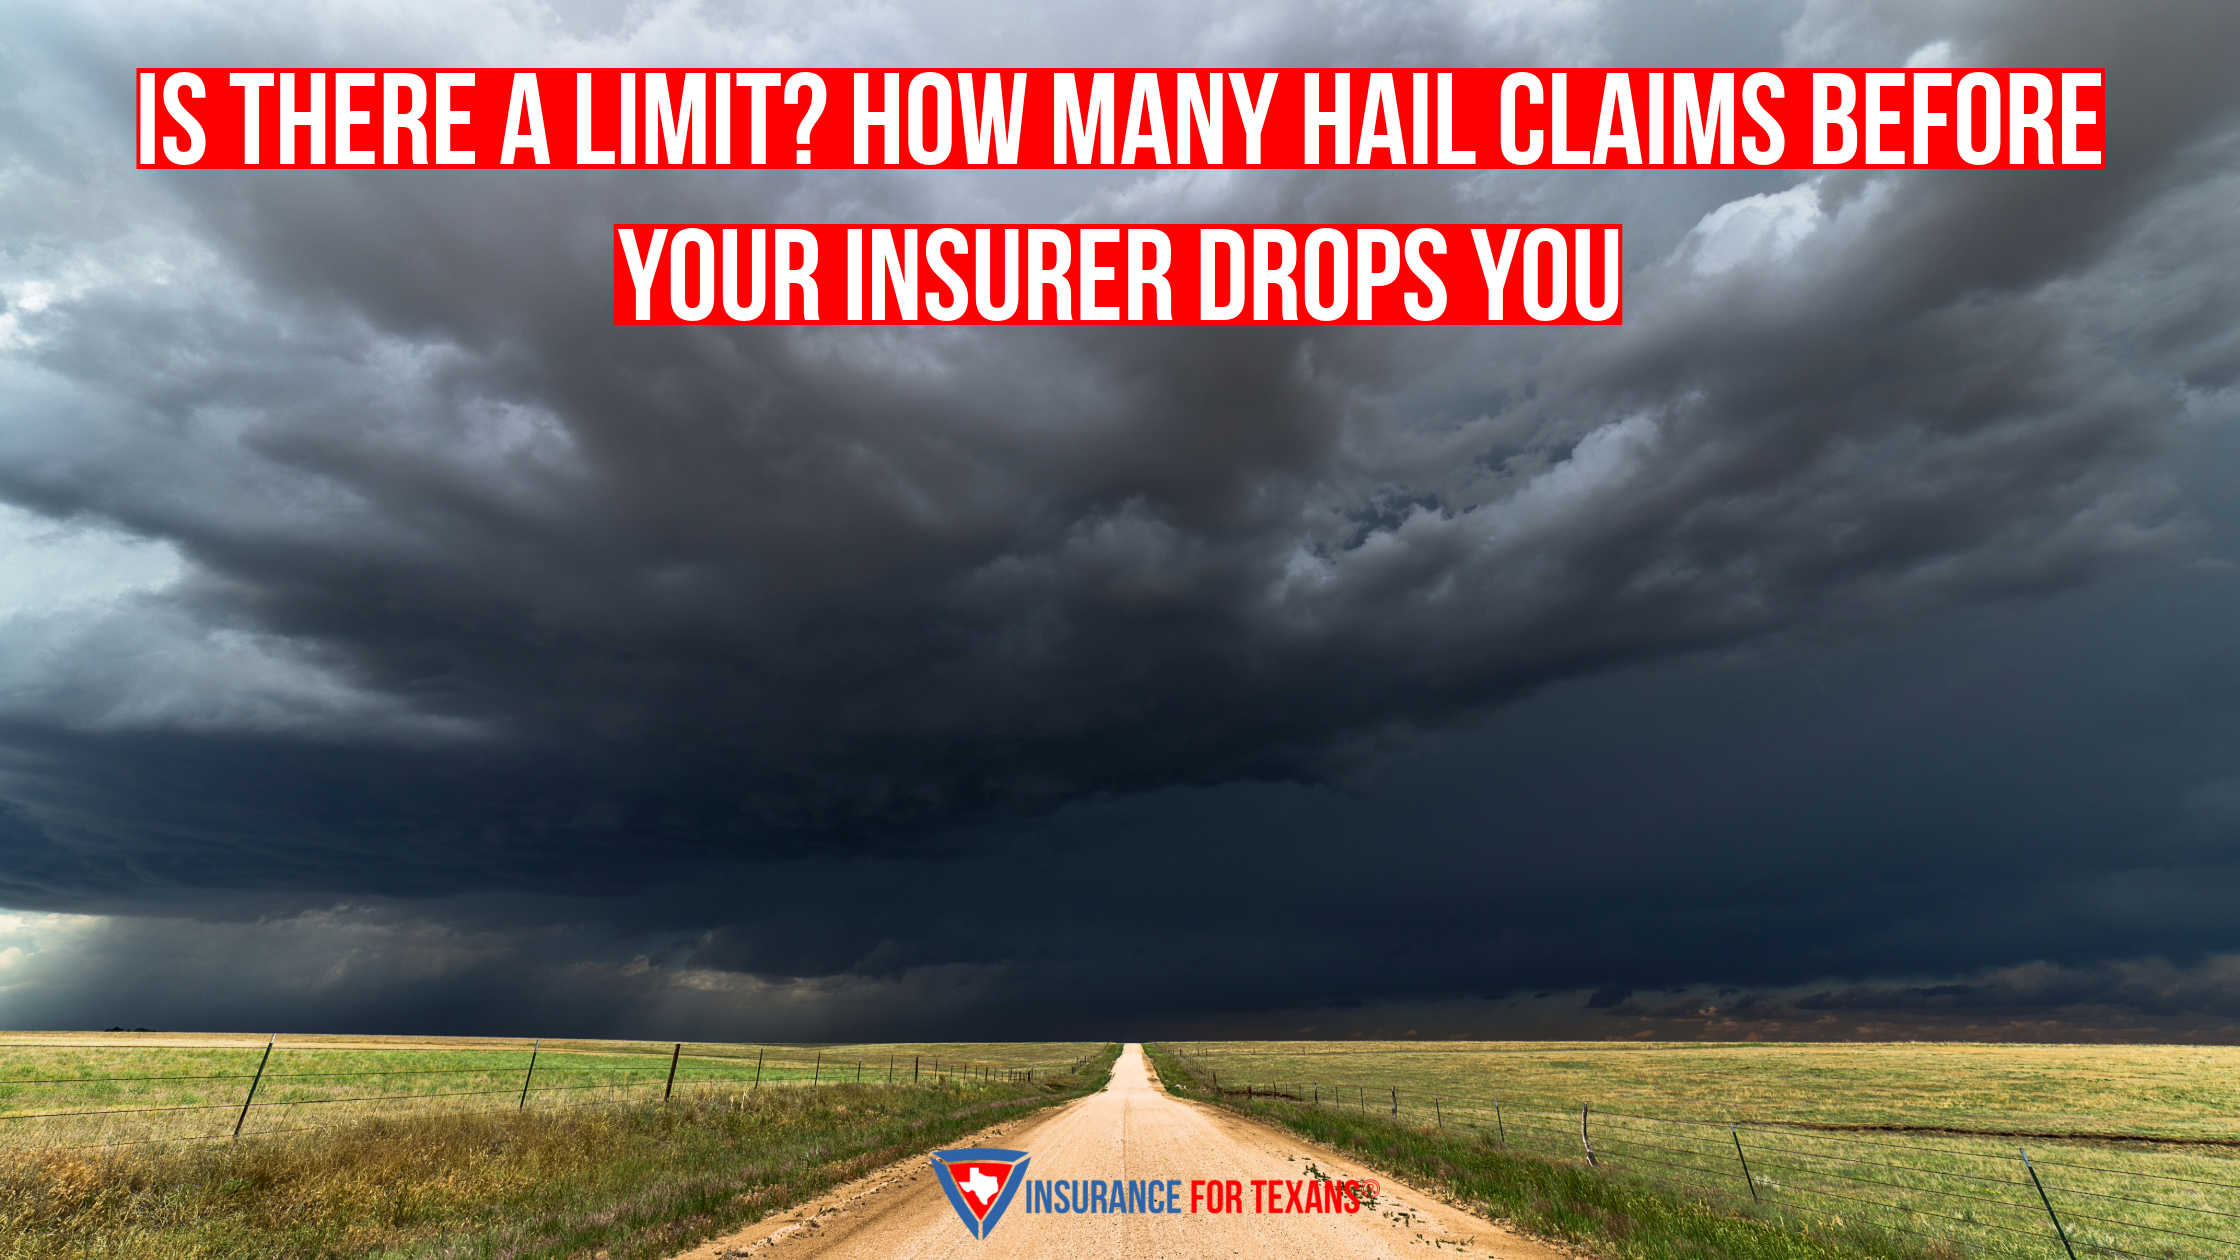 Is There a Limit? How Many Hail Claims Before Your Insurer Drops You